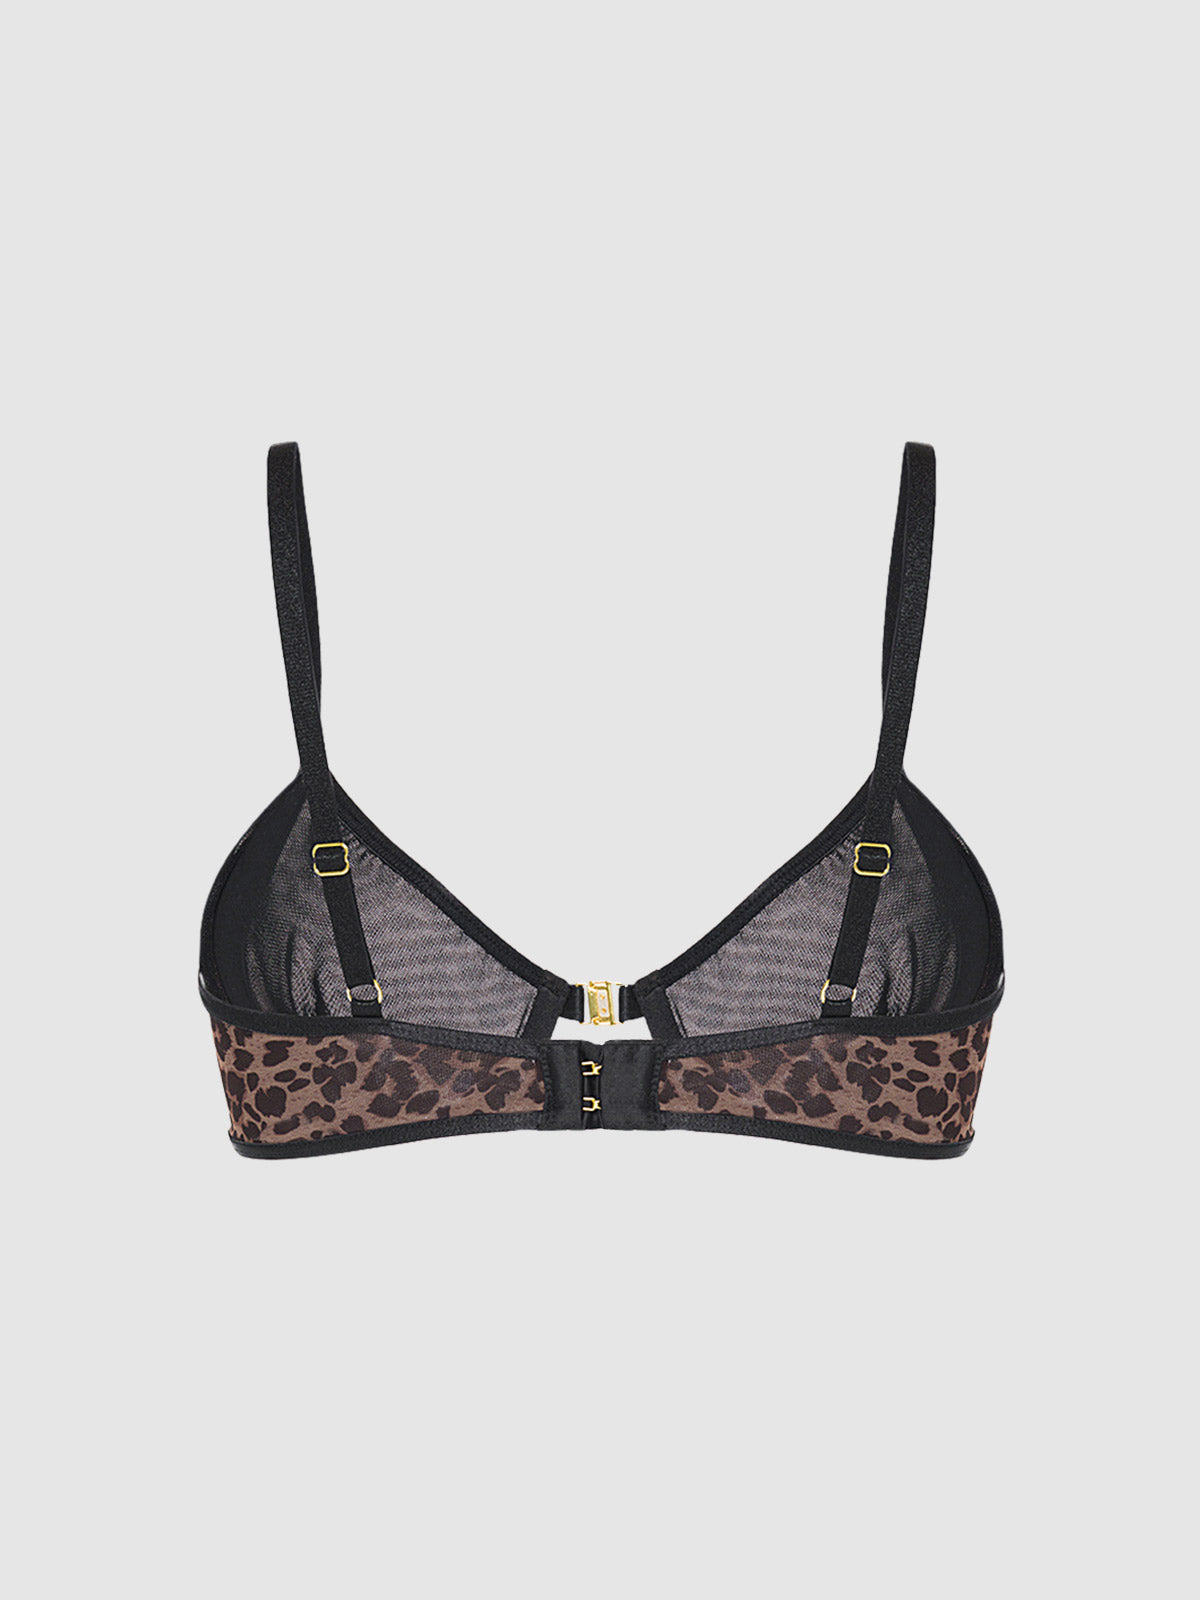 Leopard Mesh Bra Black Angle - Zyia and Soul with Nat